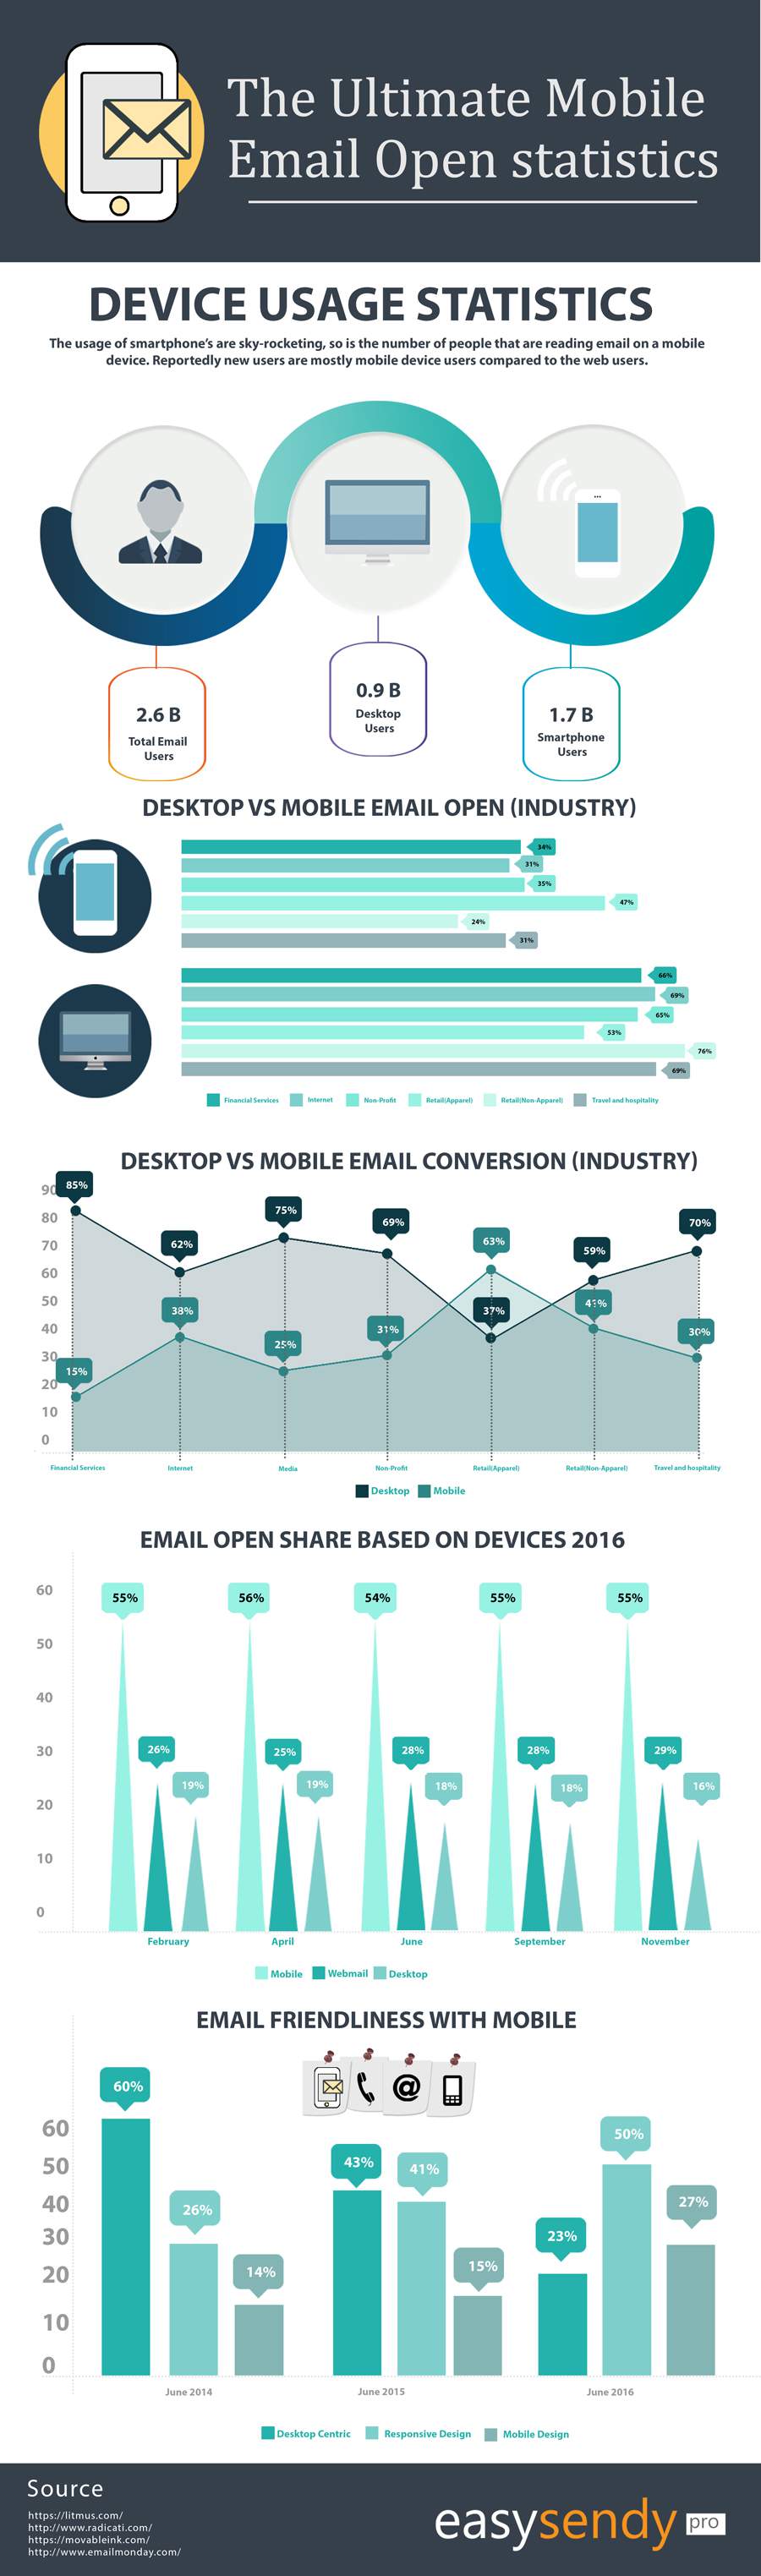 Mobile Email Open Statistics